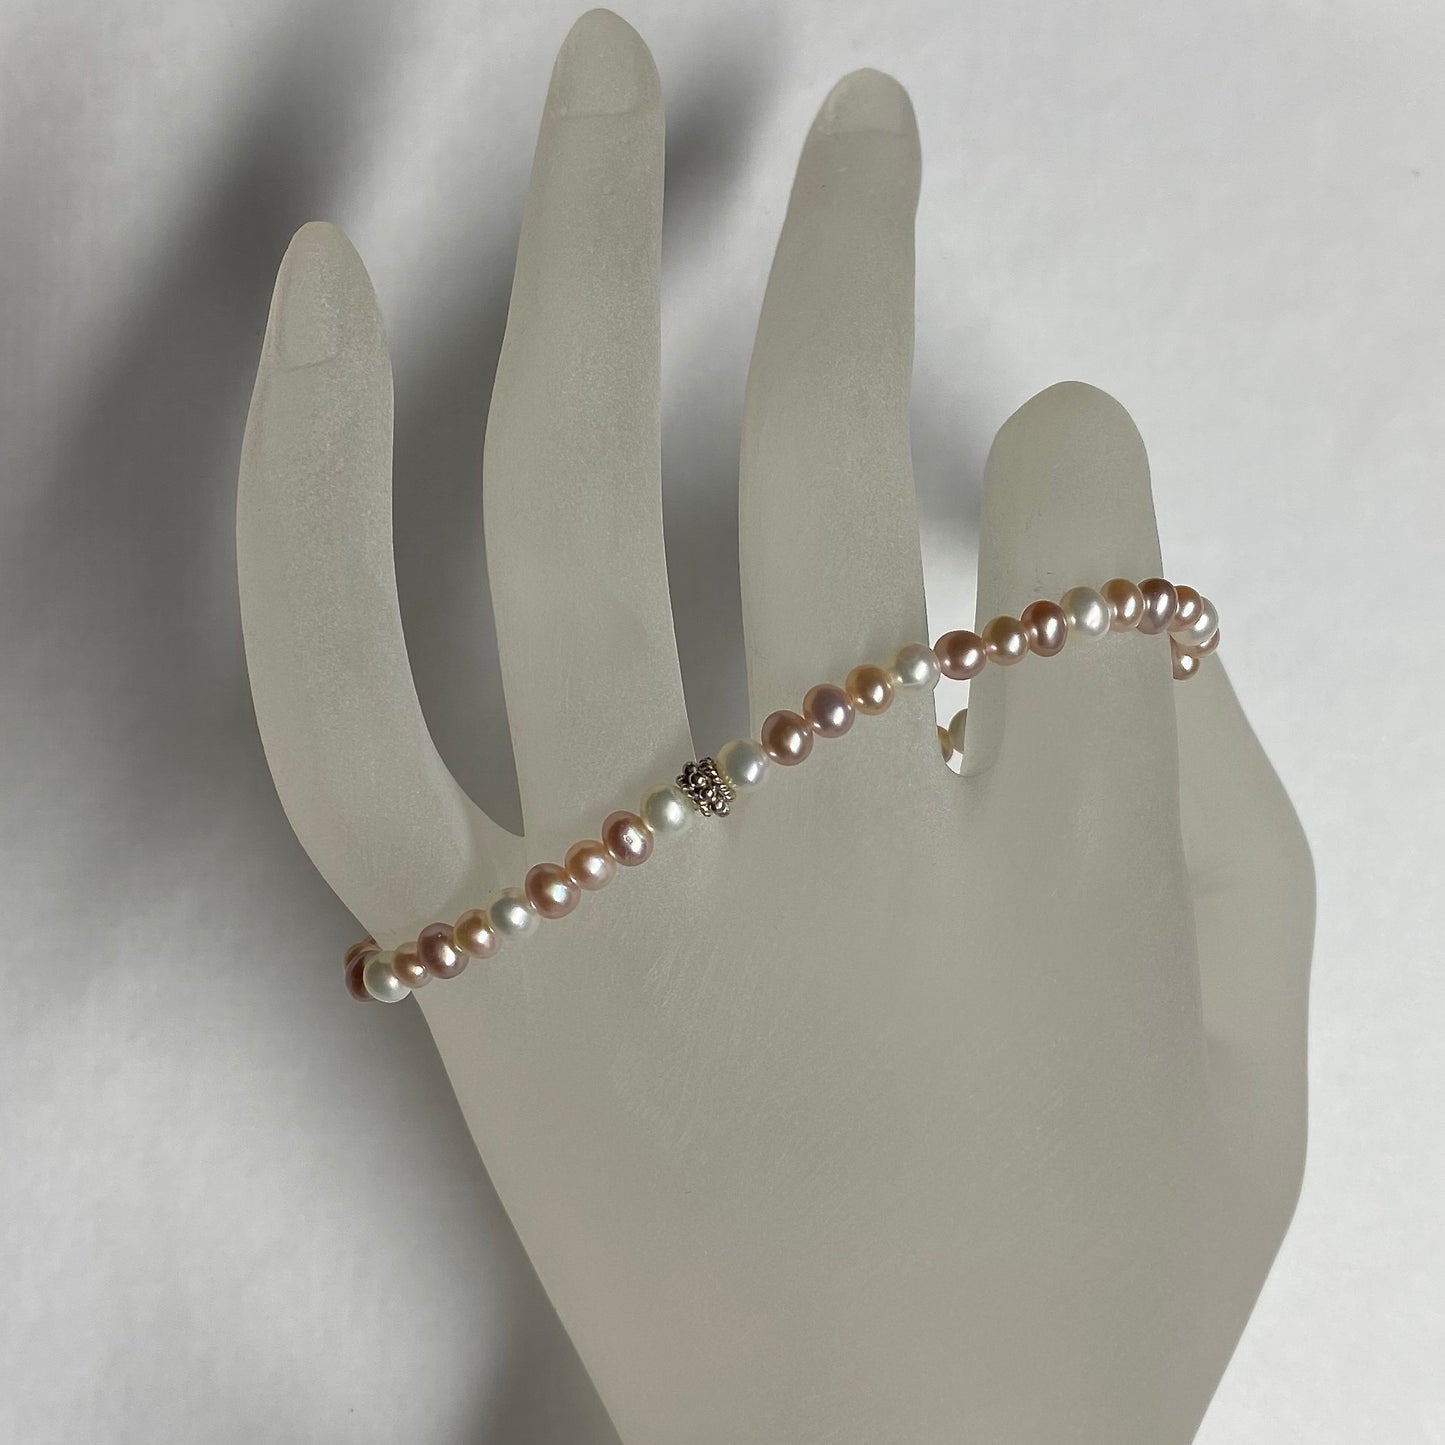 Arpaia 7.25" stretch bracelet with 4-4.5mm white and natural pink and purple cultured freshwater pearls